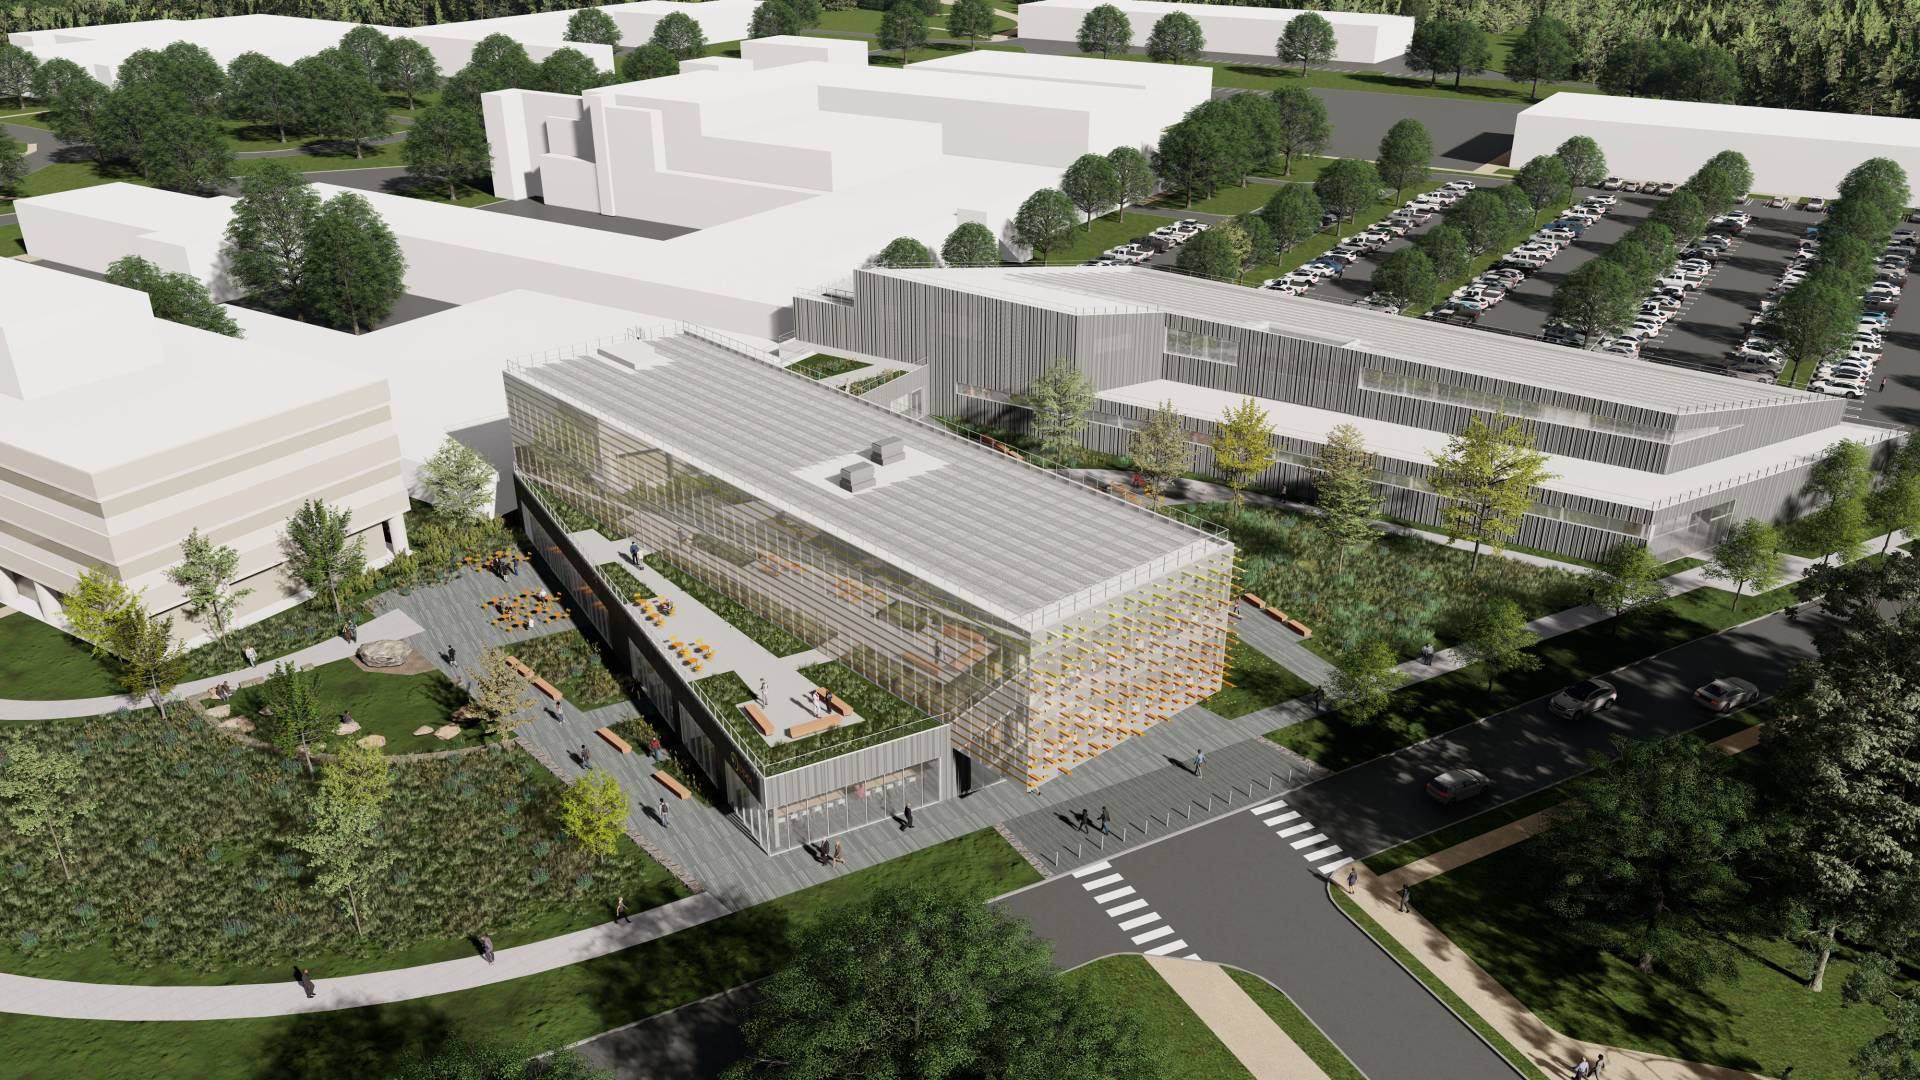 Rendering of the PPIC north wing, roof garden and south wing lab